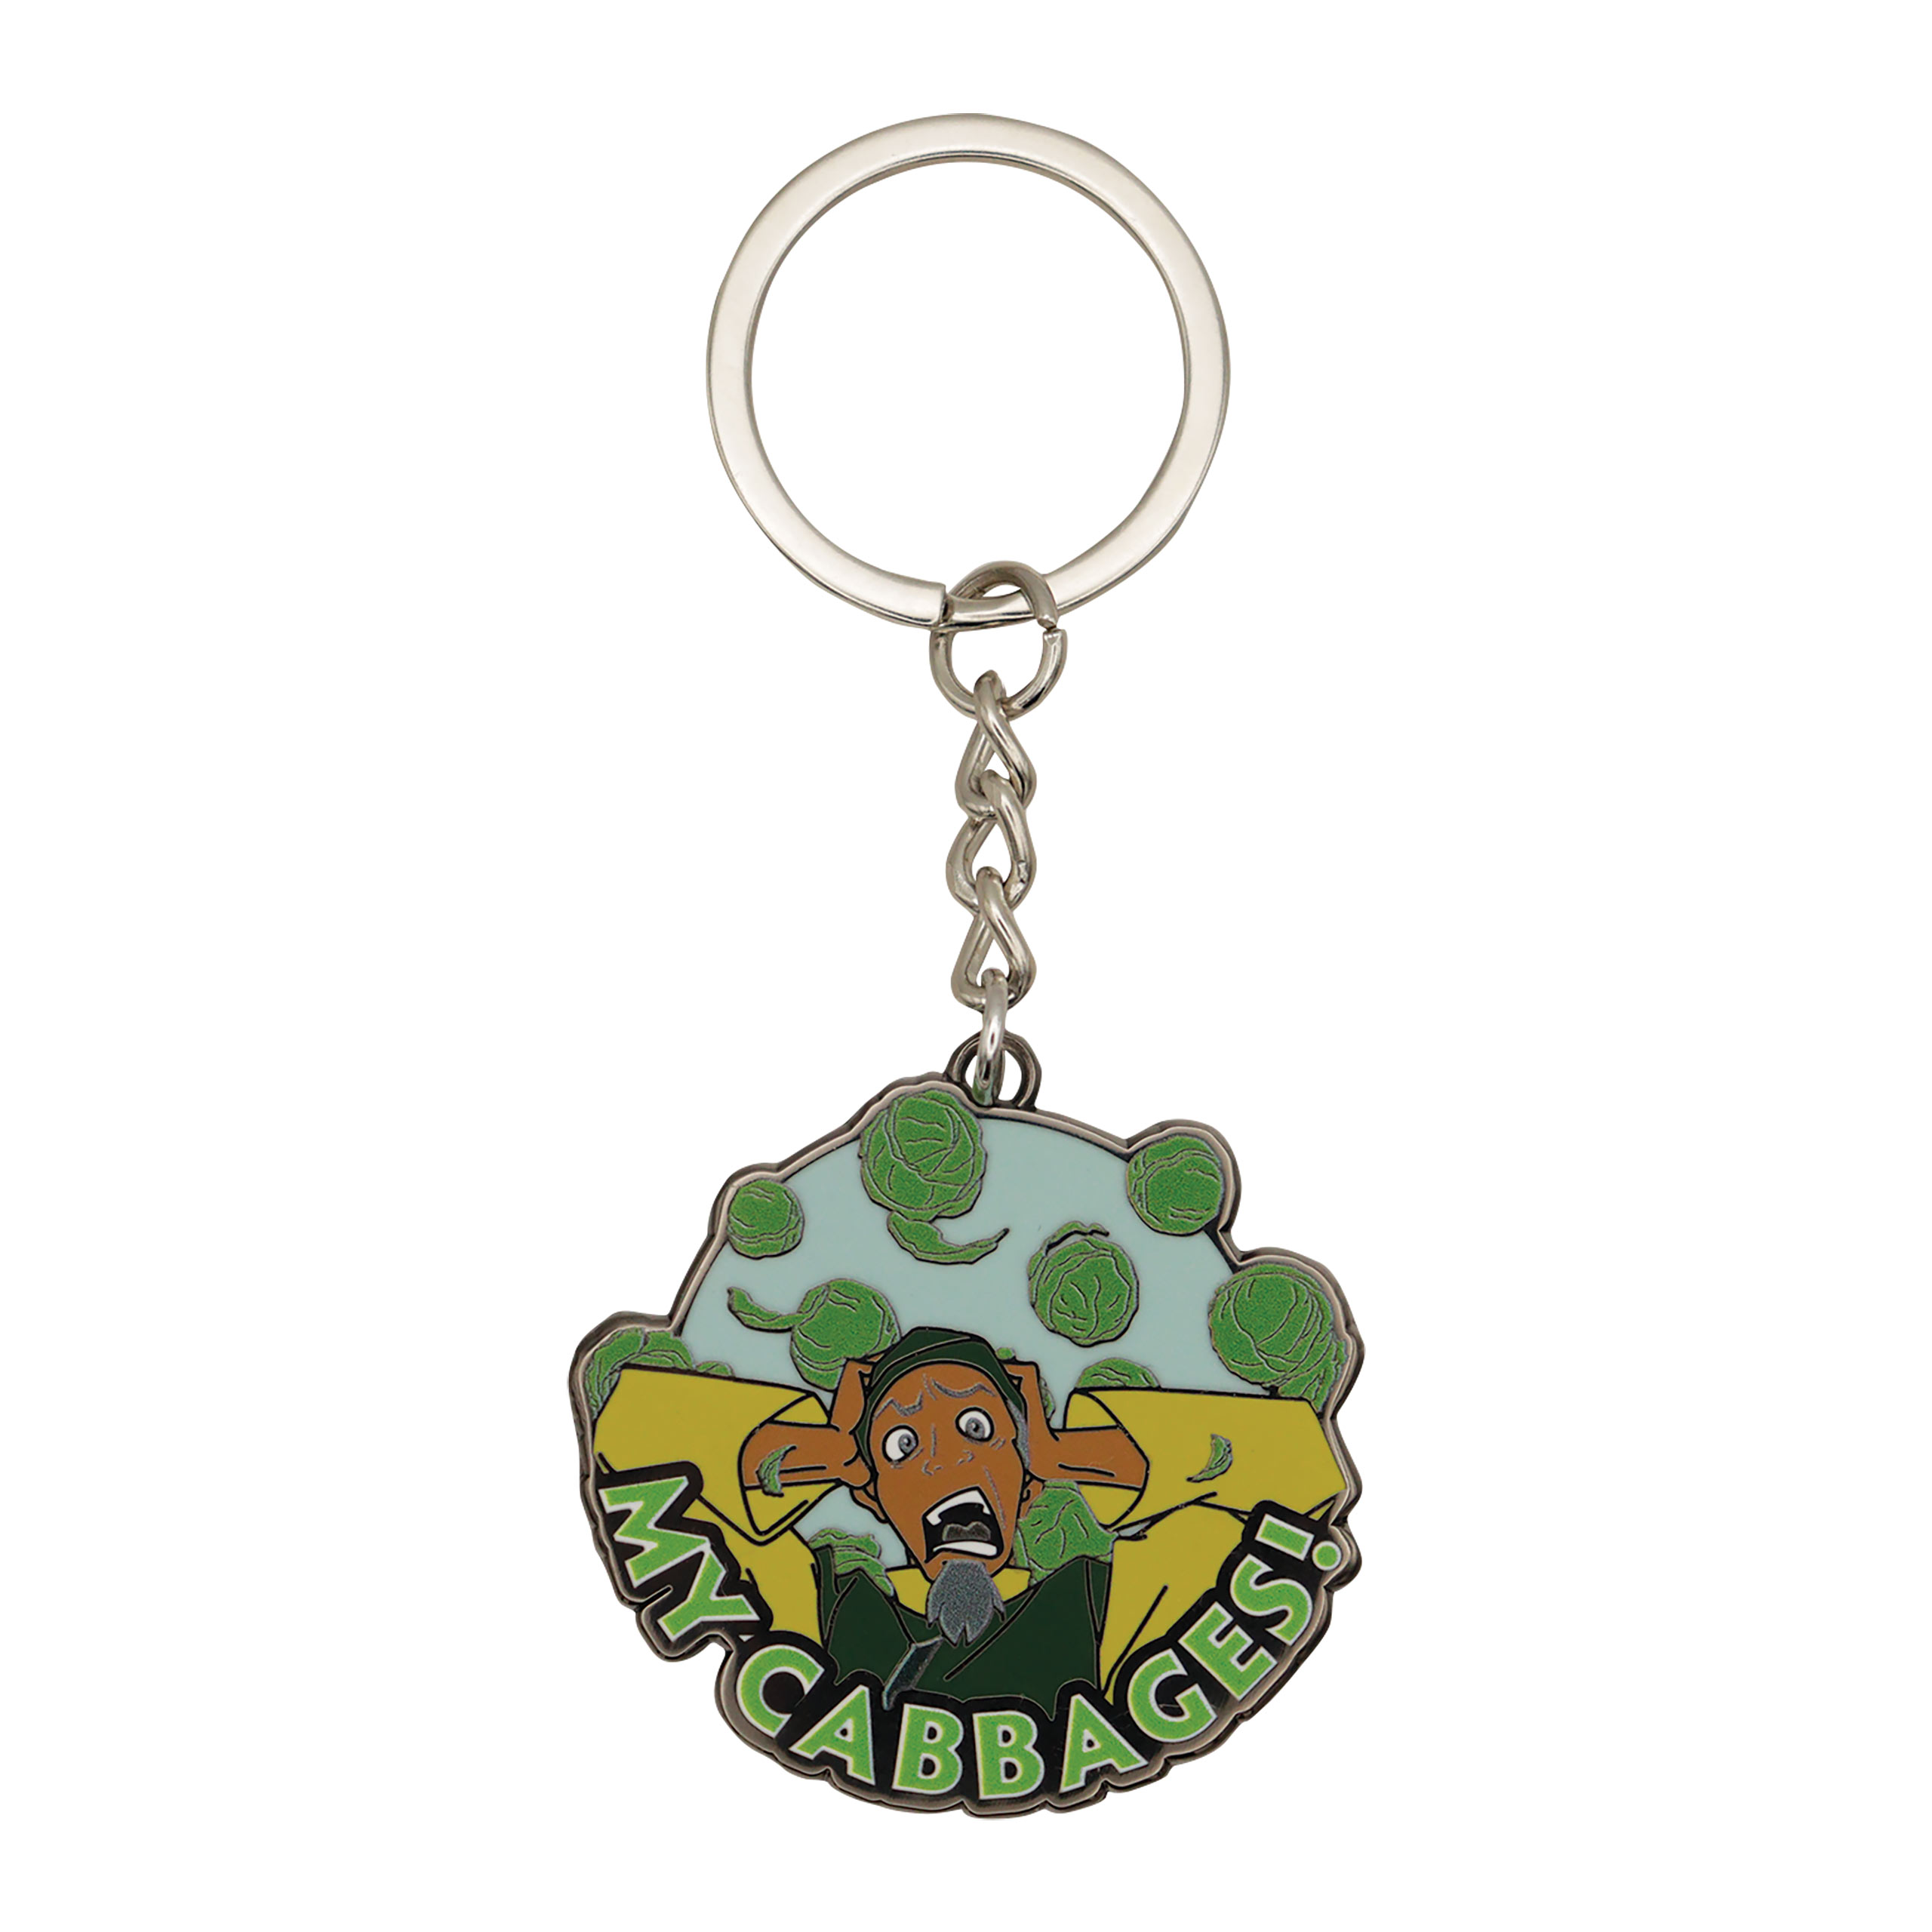 Avatar The Last Airbender - Cabbage Merchant Keychain Limited Edition